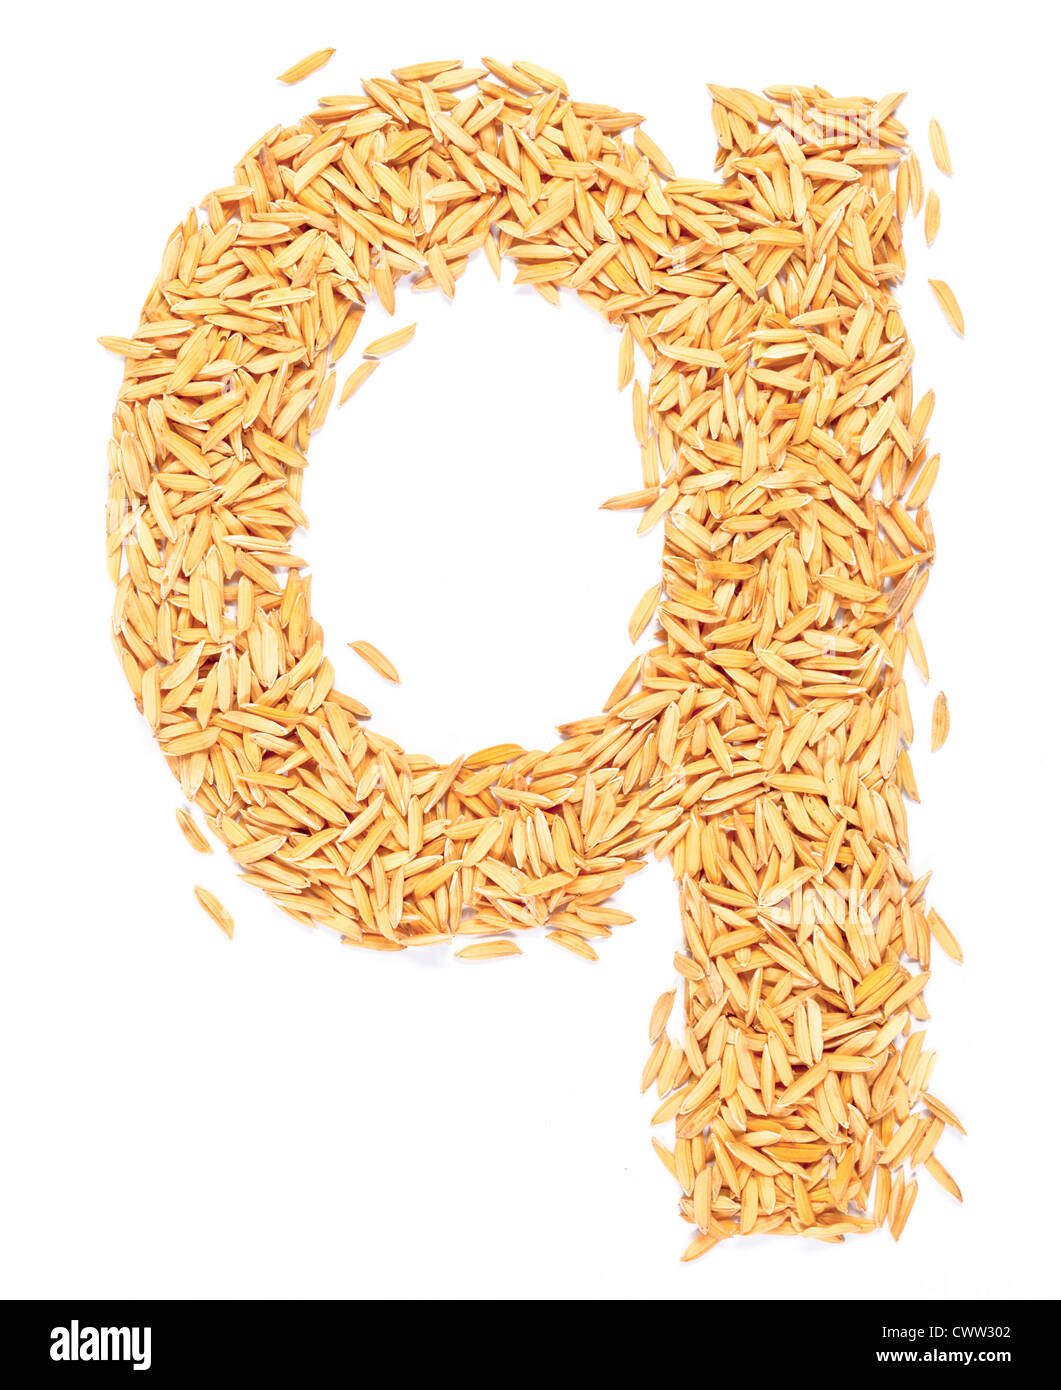 q, alphabet,Letter from Paddy rice on white Stock Photo